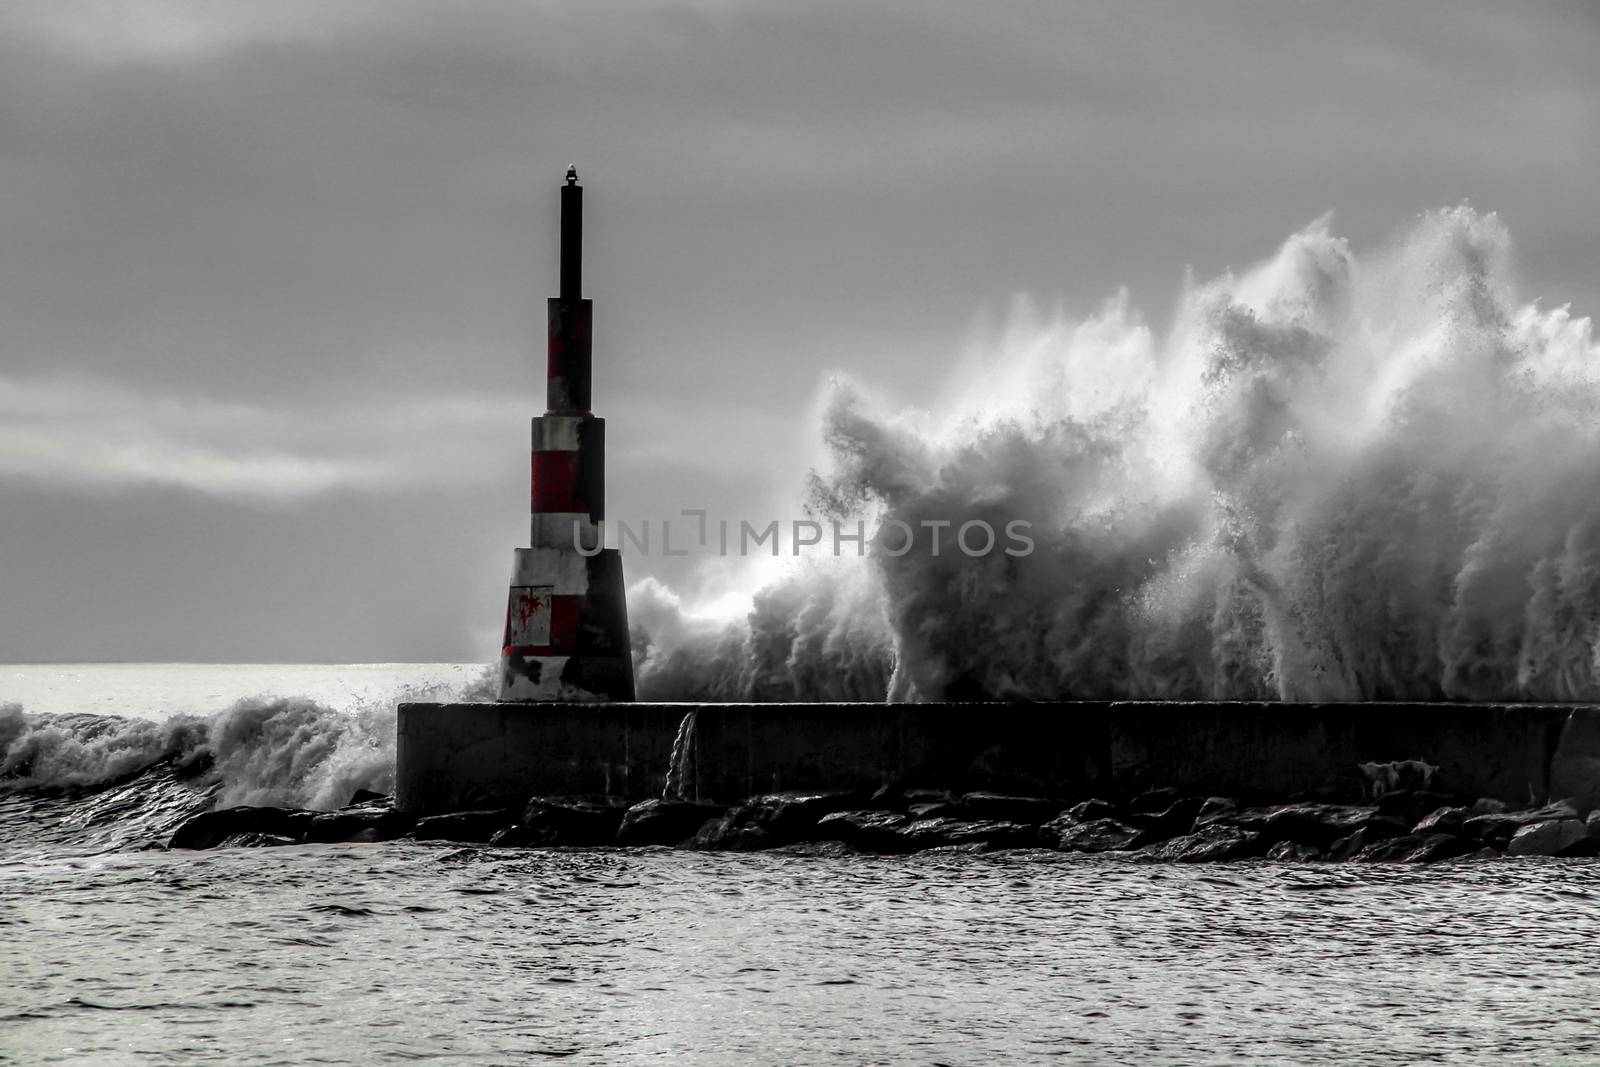 Giant waves breaking on the breakwater and the lighthouse on Aguda Beach, Miramar, Arcozelos town